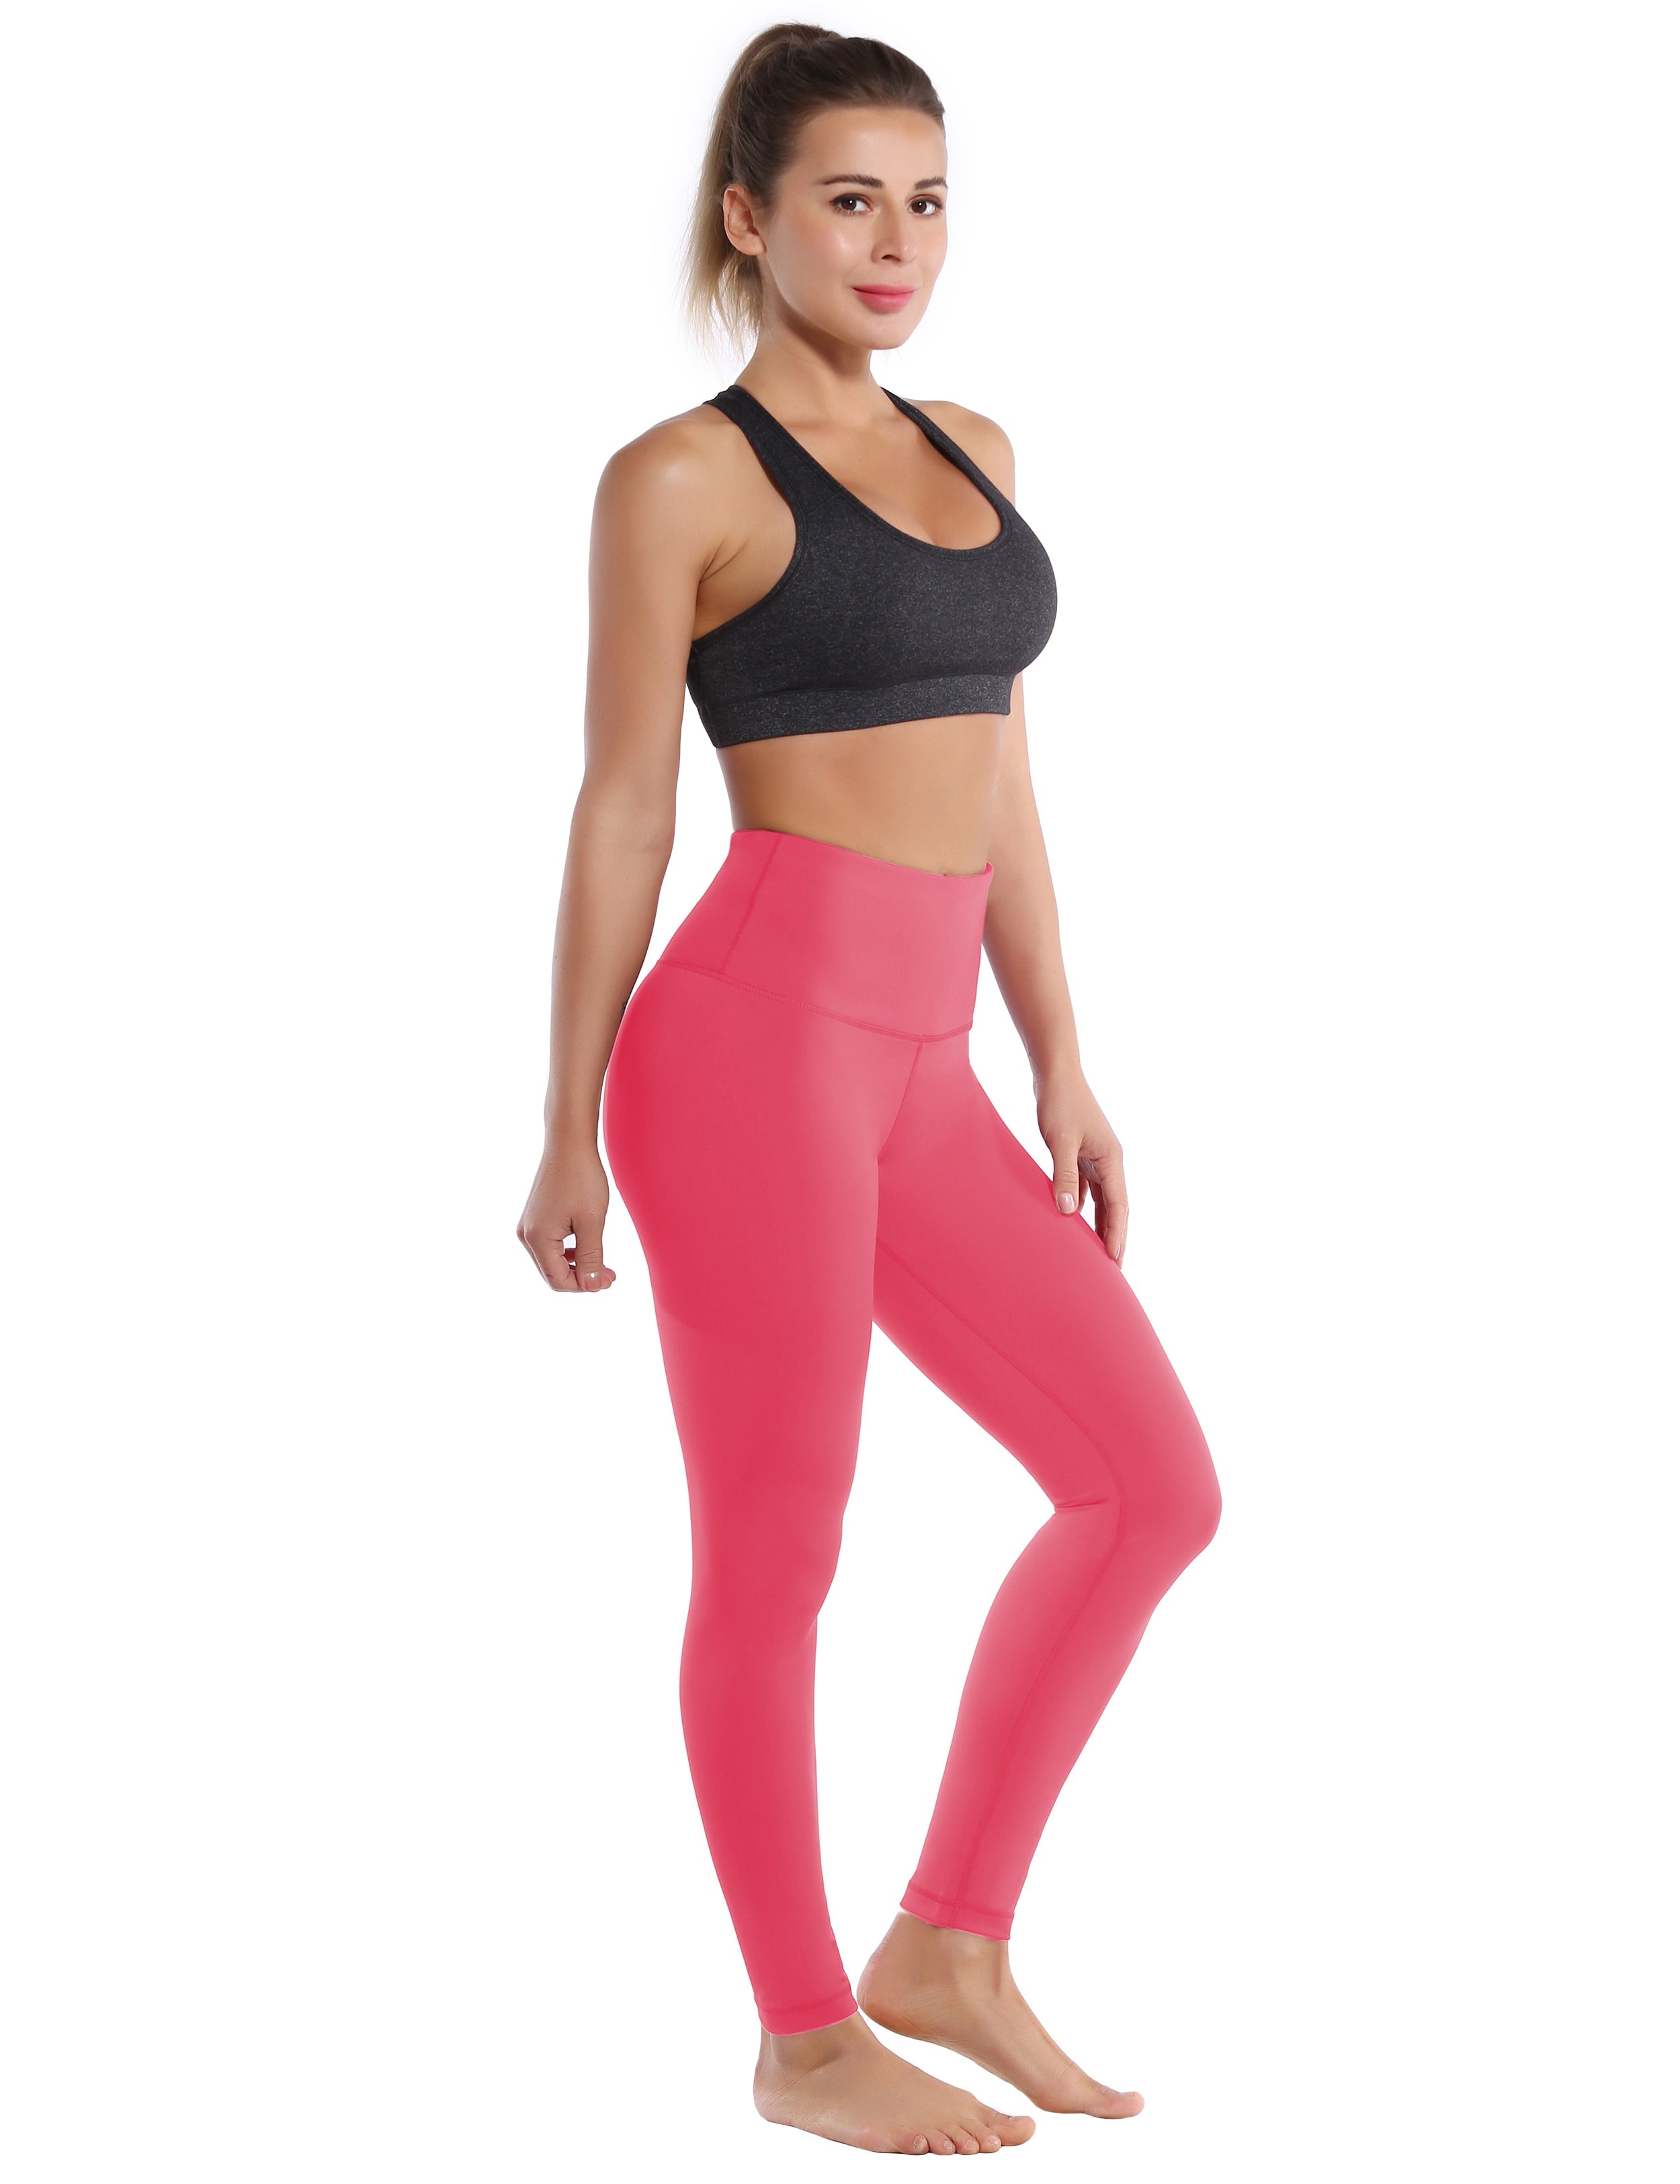 High Waist Yoga Pants rosecoral 75%Nylon/25%Spandex Fabric doesn't attract lint easily 4-way stretch No see-through Moisture-wicking Tummy control Inner pocket Four lengths